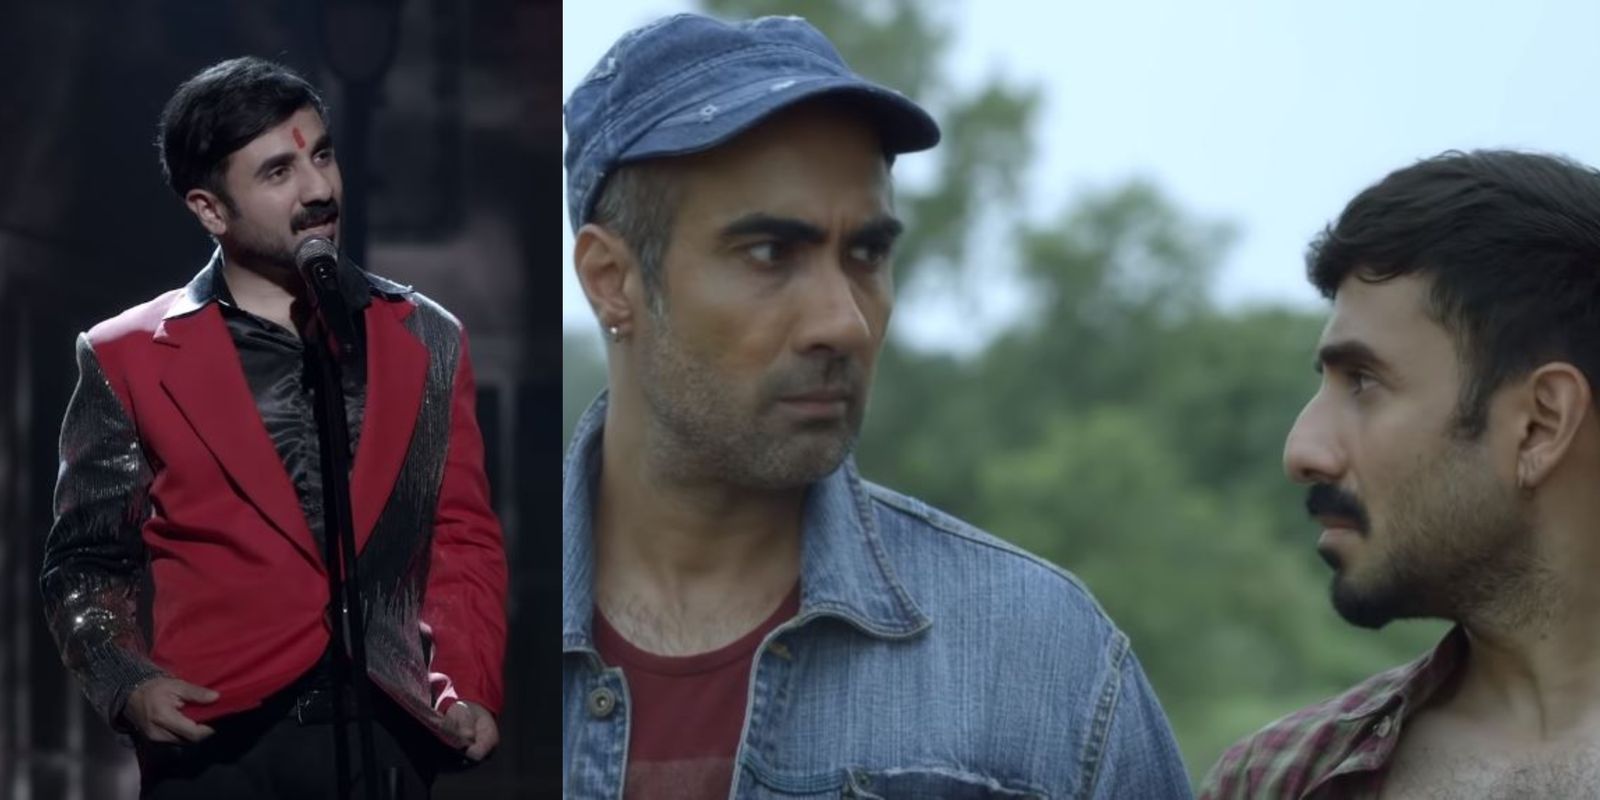 Hasmukh Trailer: Vir Das To Play A Stand-up Comic Who Needs To Taste Blood To Crack Jokes!